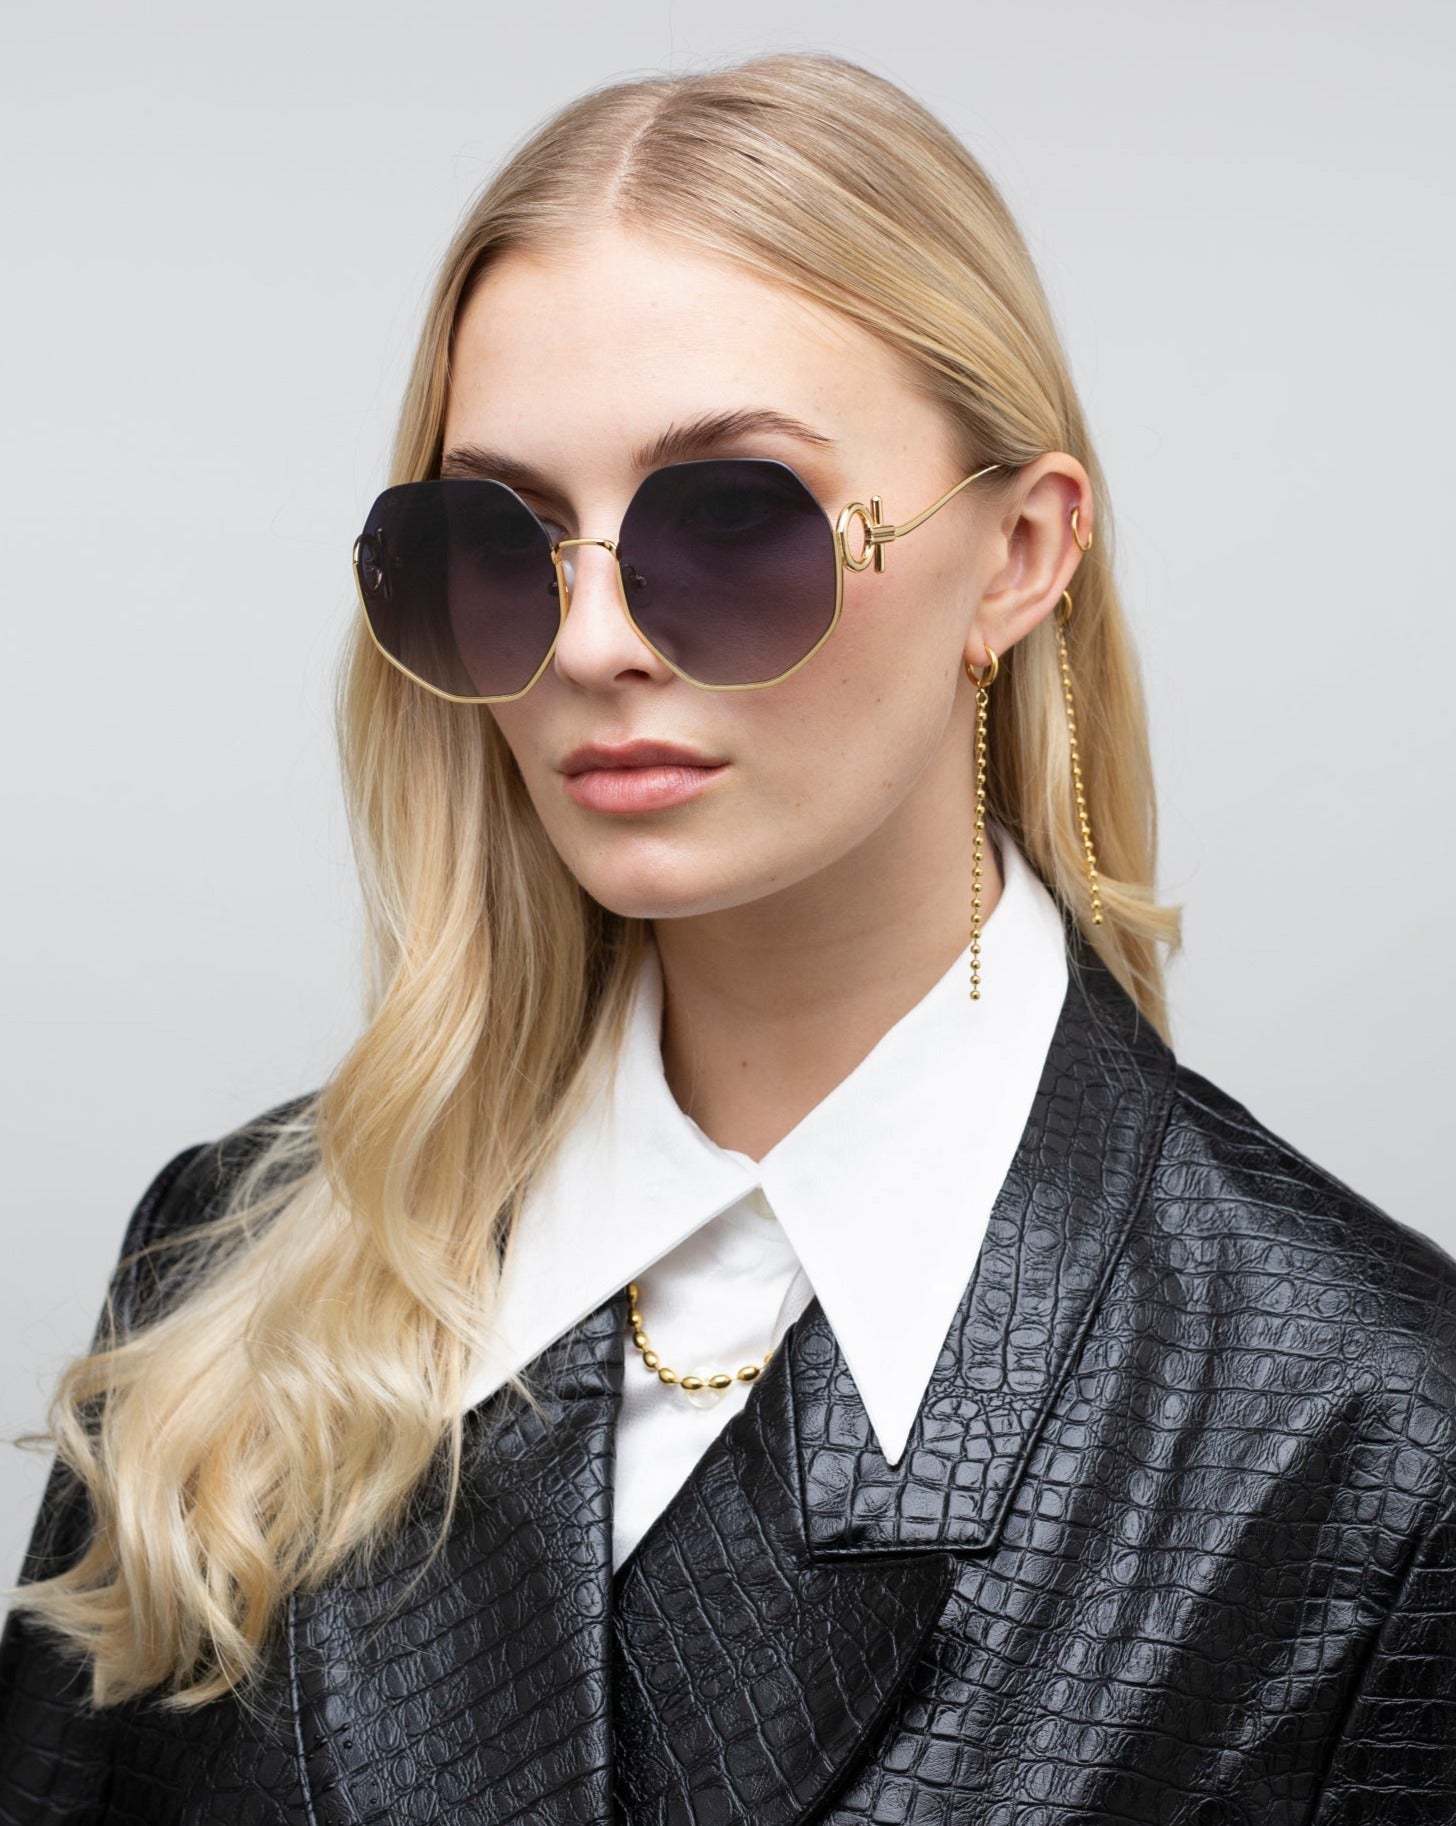 A woman with long blonde hair wearing large, round For Art's Sake® Palace sunglasses that are UVA & UVB-protected and a black, textured leather jacket. She has a white collared shirt underneath and is accessorized with a dangling earring and an 18-karat gold-plated chain necklace. The background is plain and light-colored.